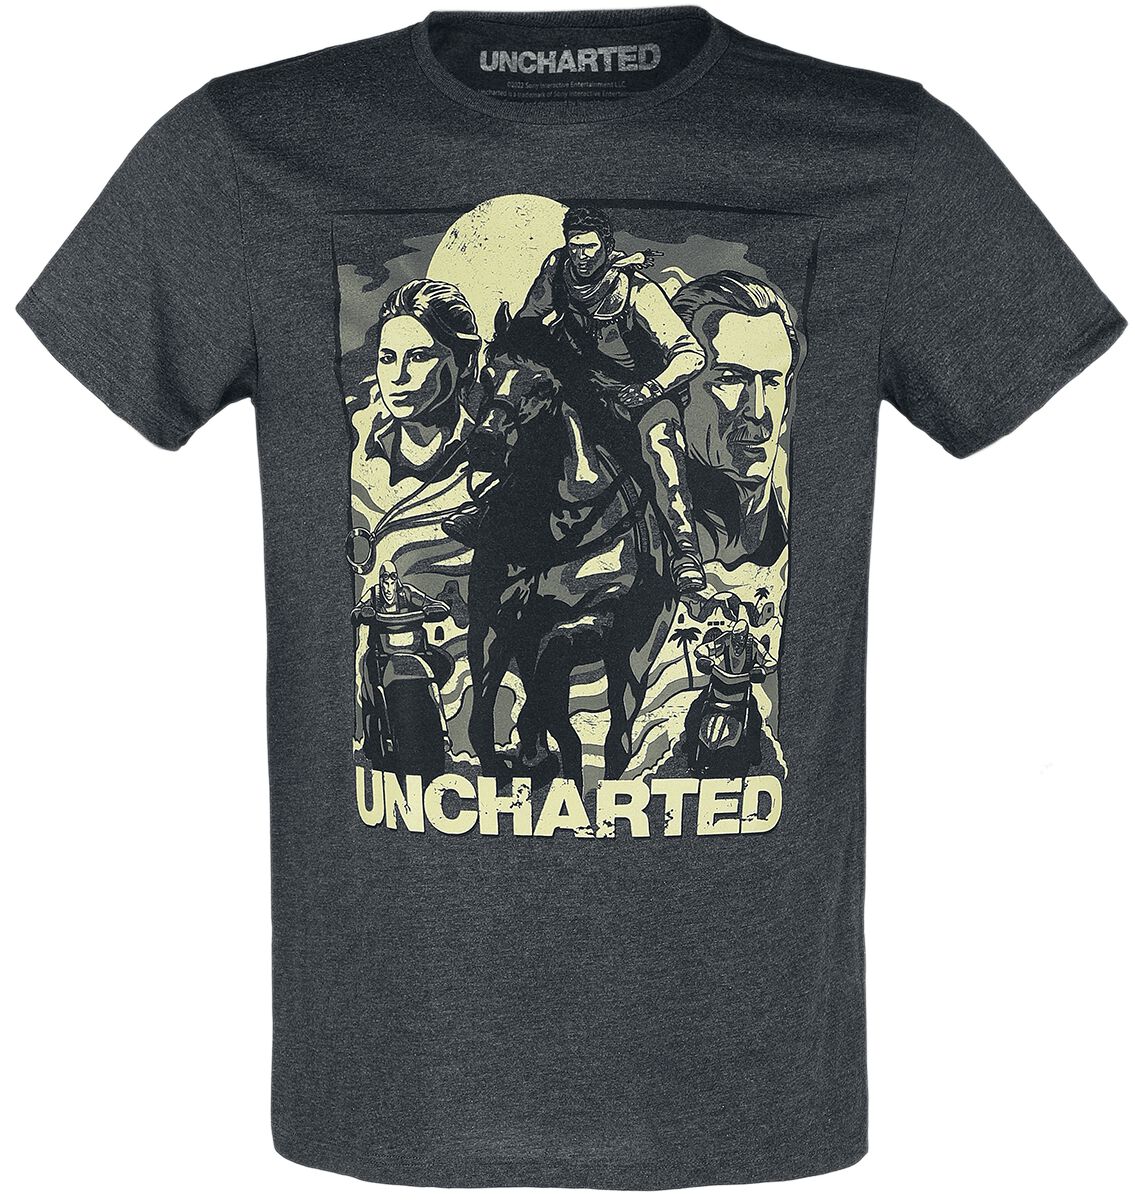 Uncharted Cover Page T-Shirt mottled grey